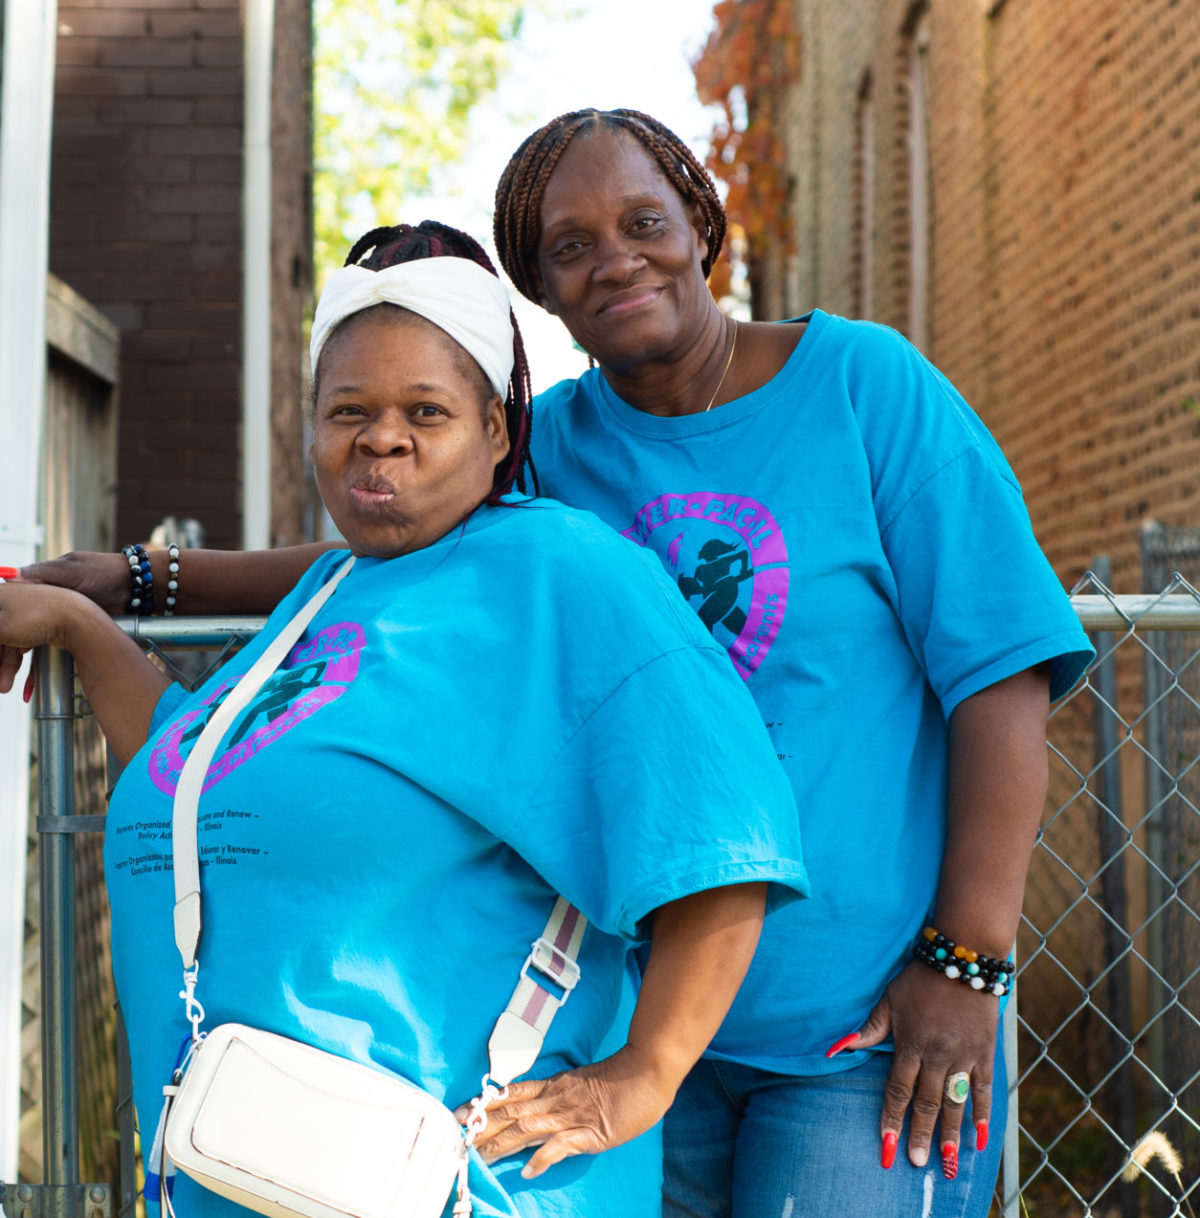 Two women in matching blue POWER-PAC IL shirts pose for a photo